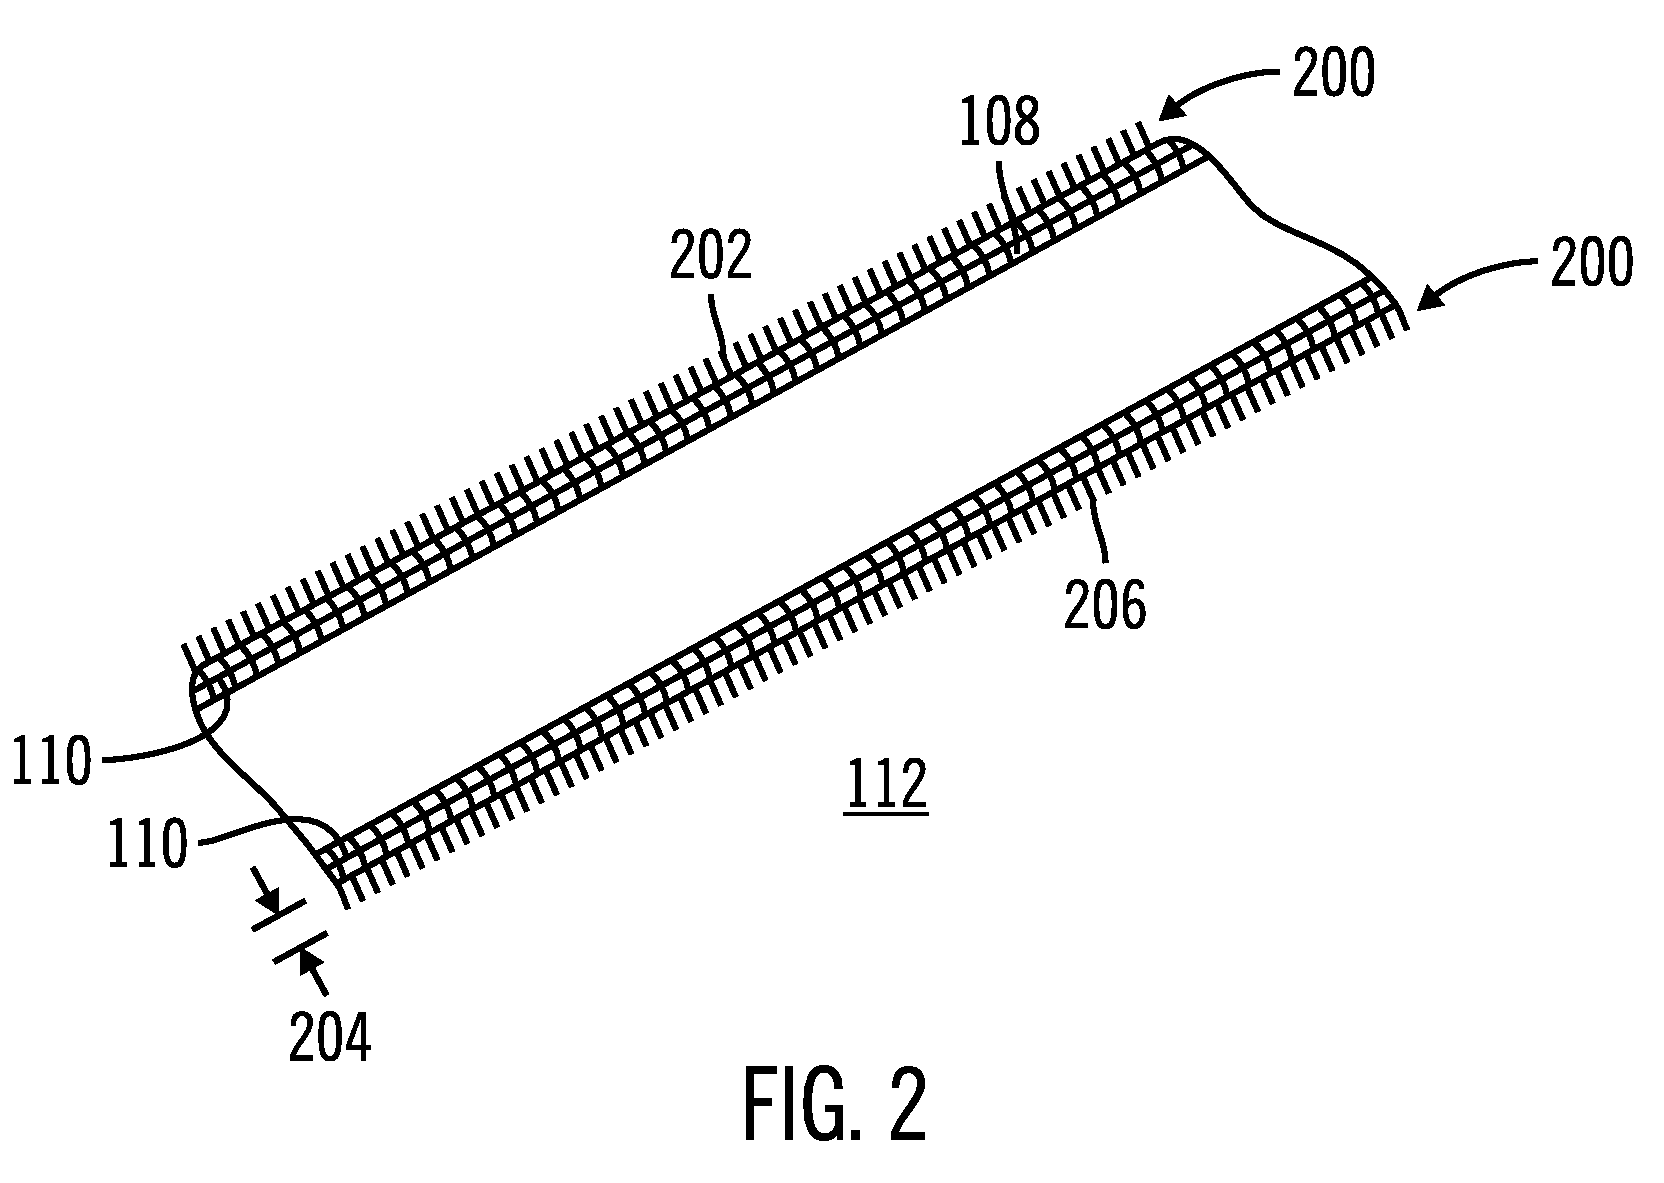 Method of Making Soft Edge Textile Labels to be Applied to Garments